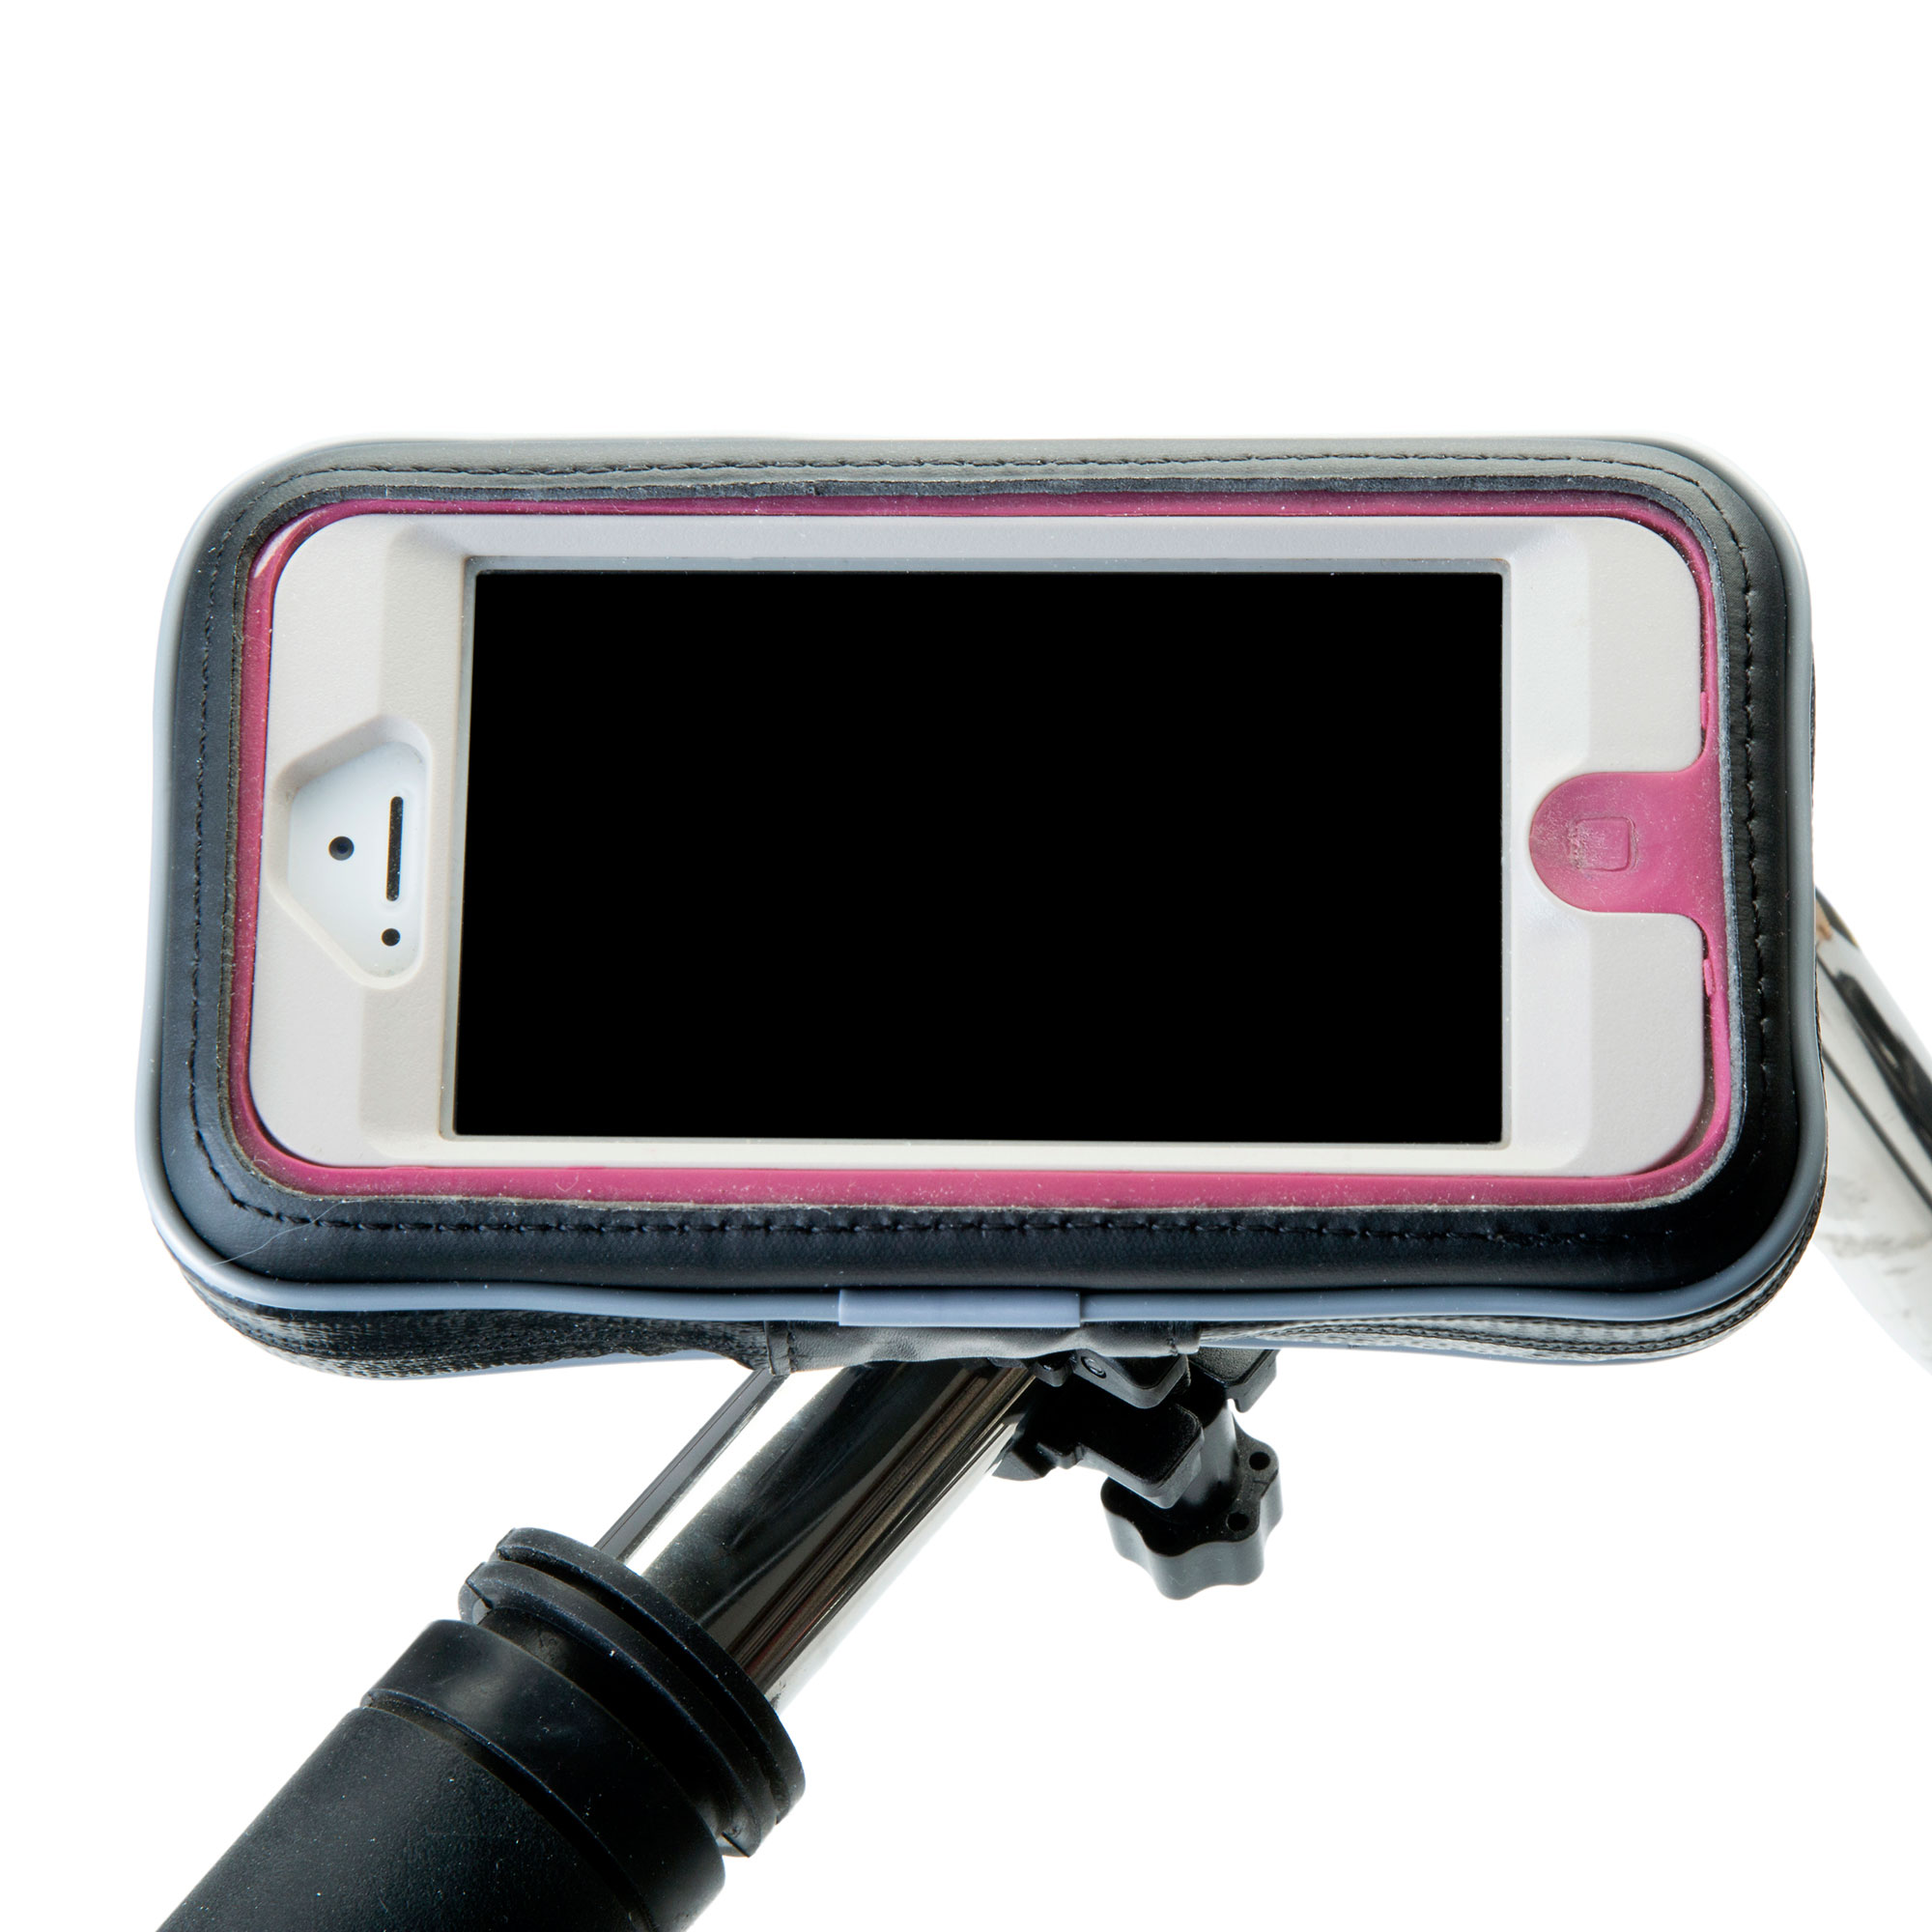 Heavy Duty Weather Resistant Bicycle / Motorcycle Handlebar Mount Holder Designed for the LG A290